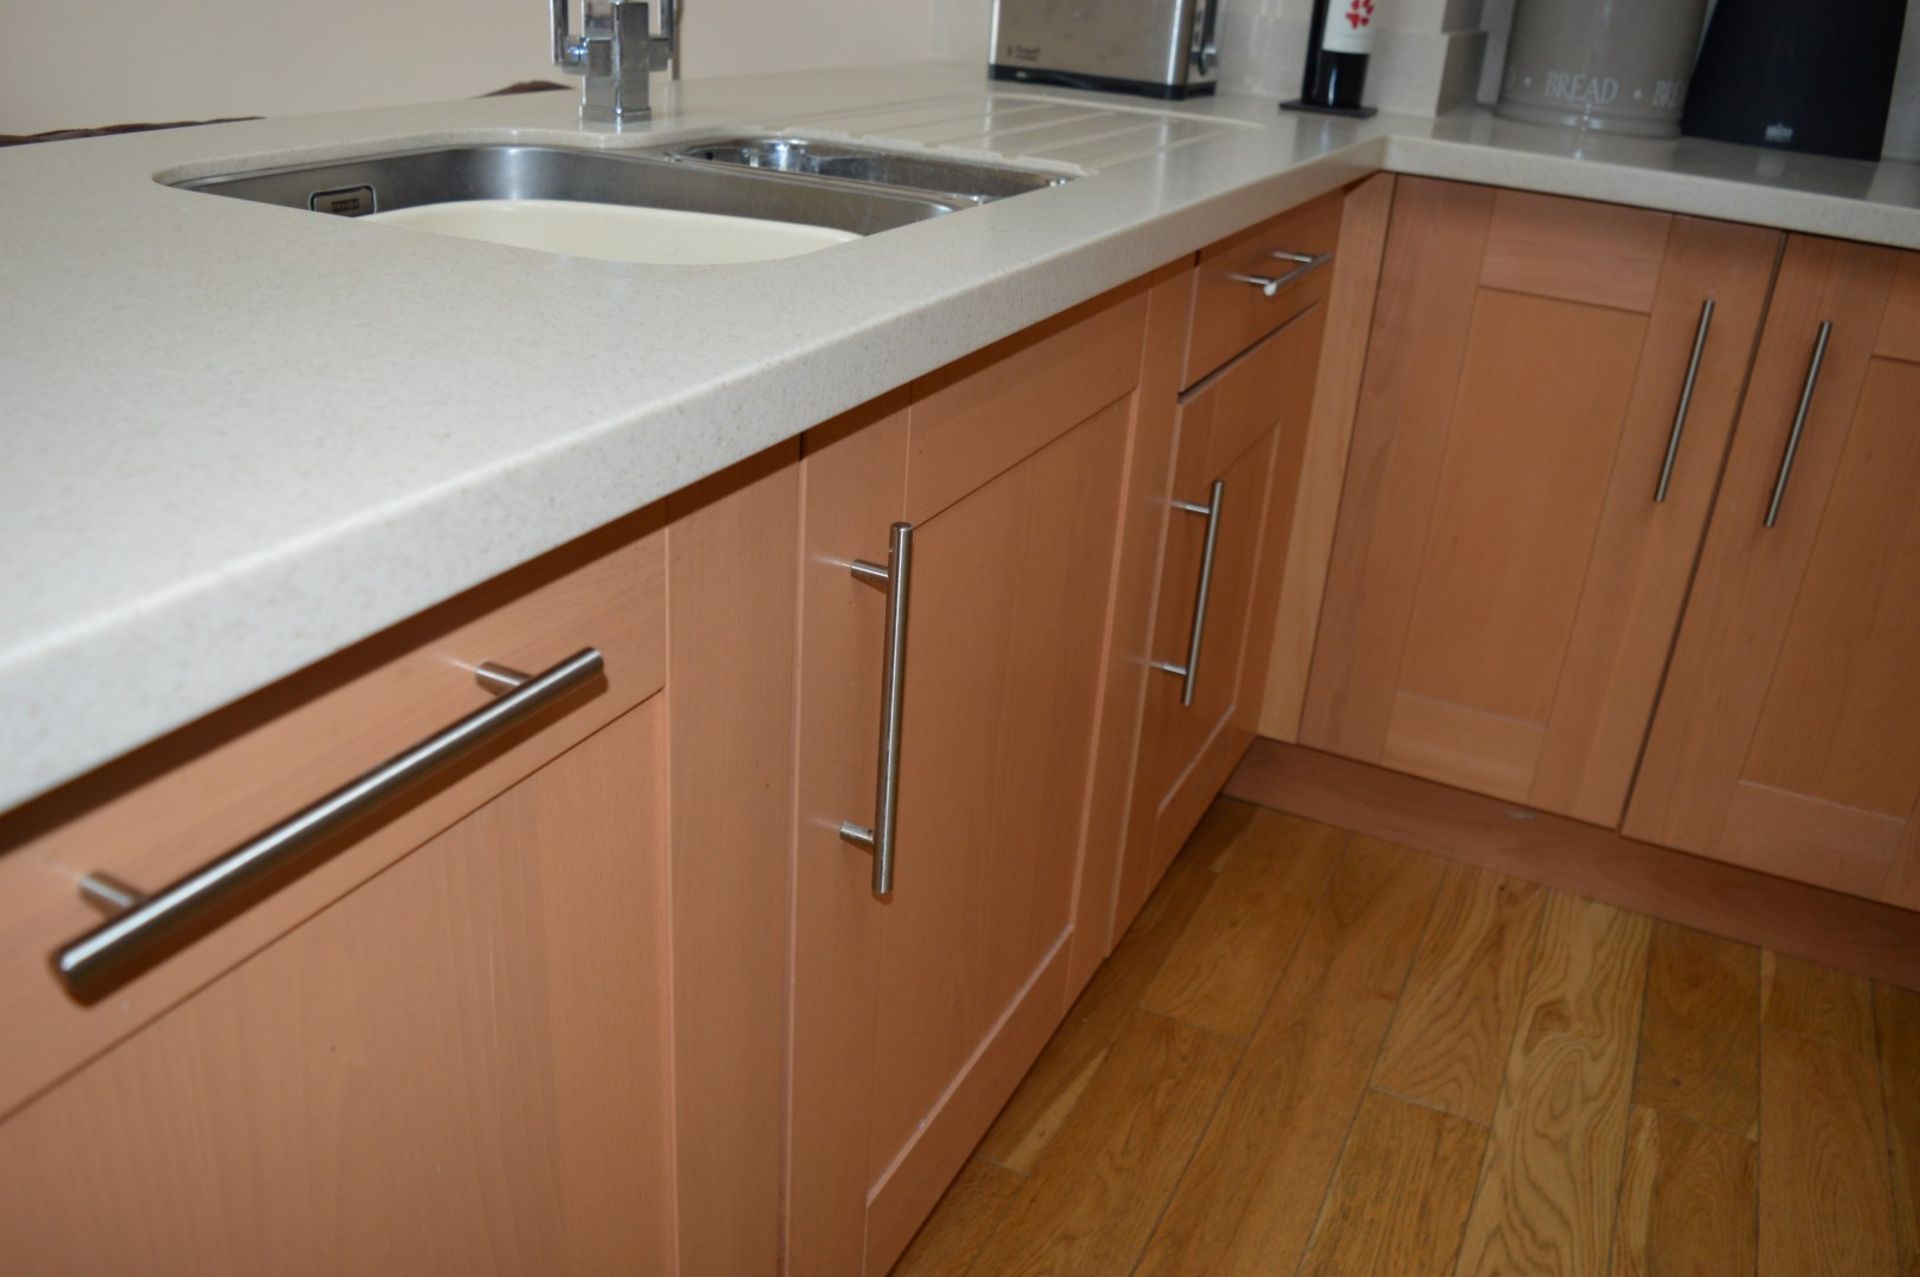 1 x Bespoke Maelstrom Solid Wood Fitted Kitchen With Corian Tops - In Excellent Condition - Neff - Image 24 of 65